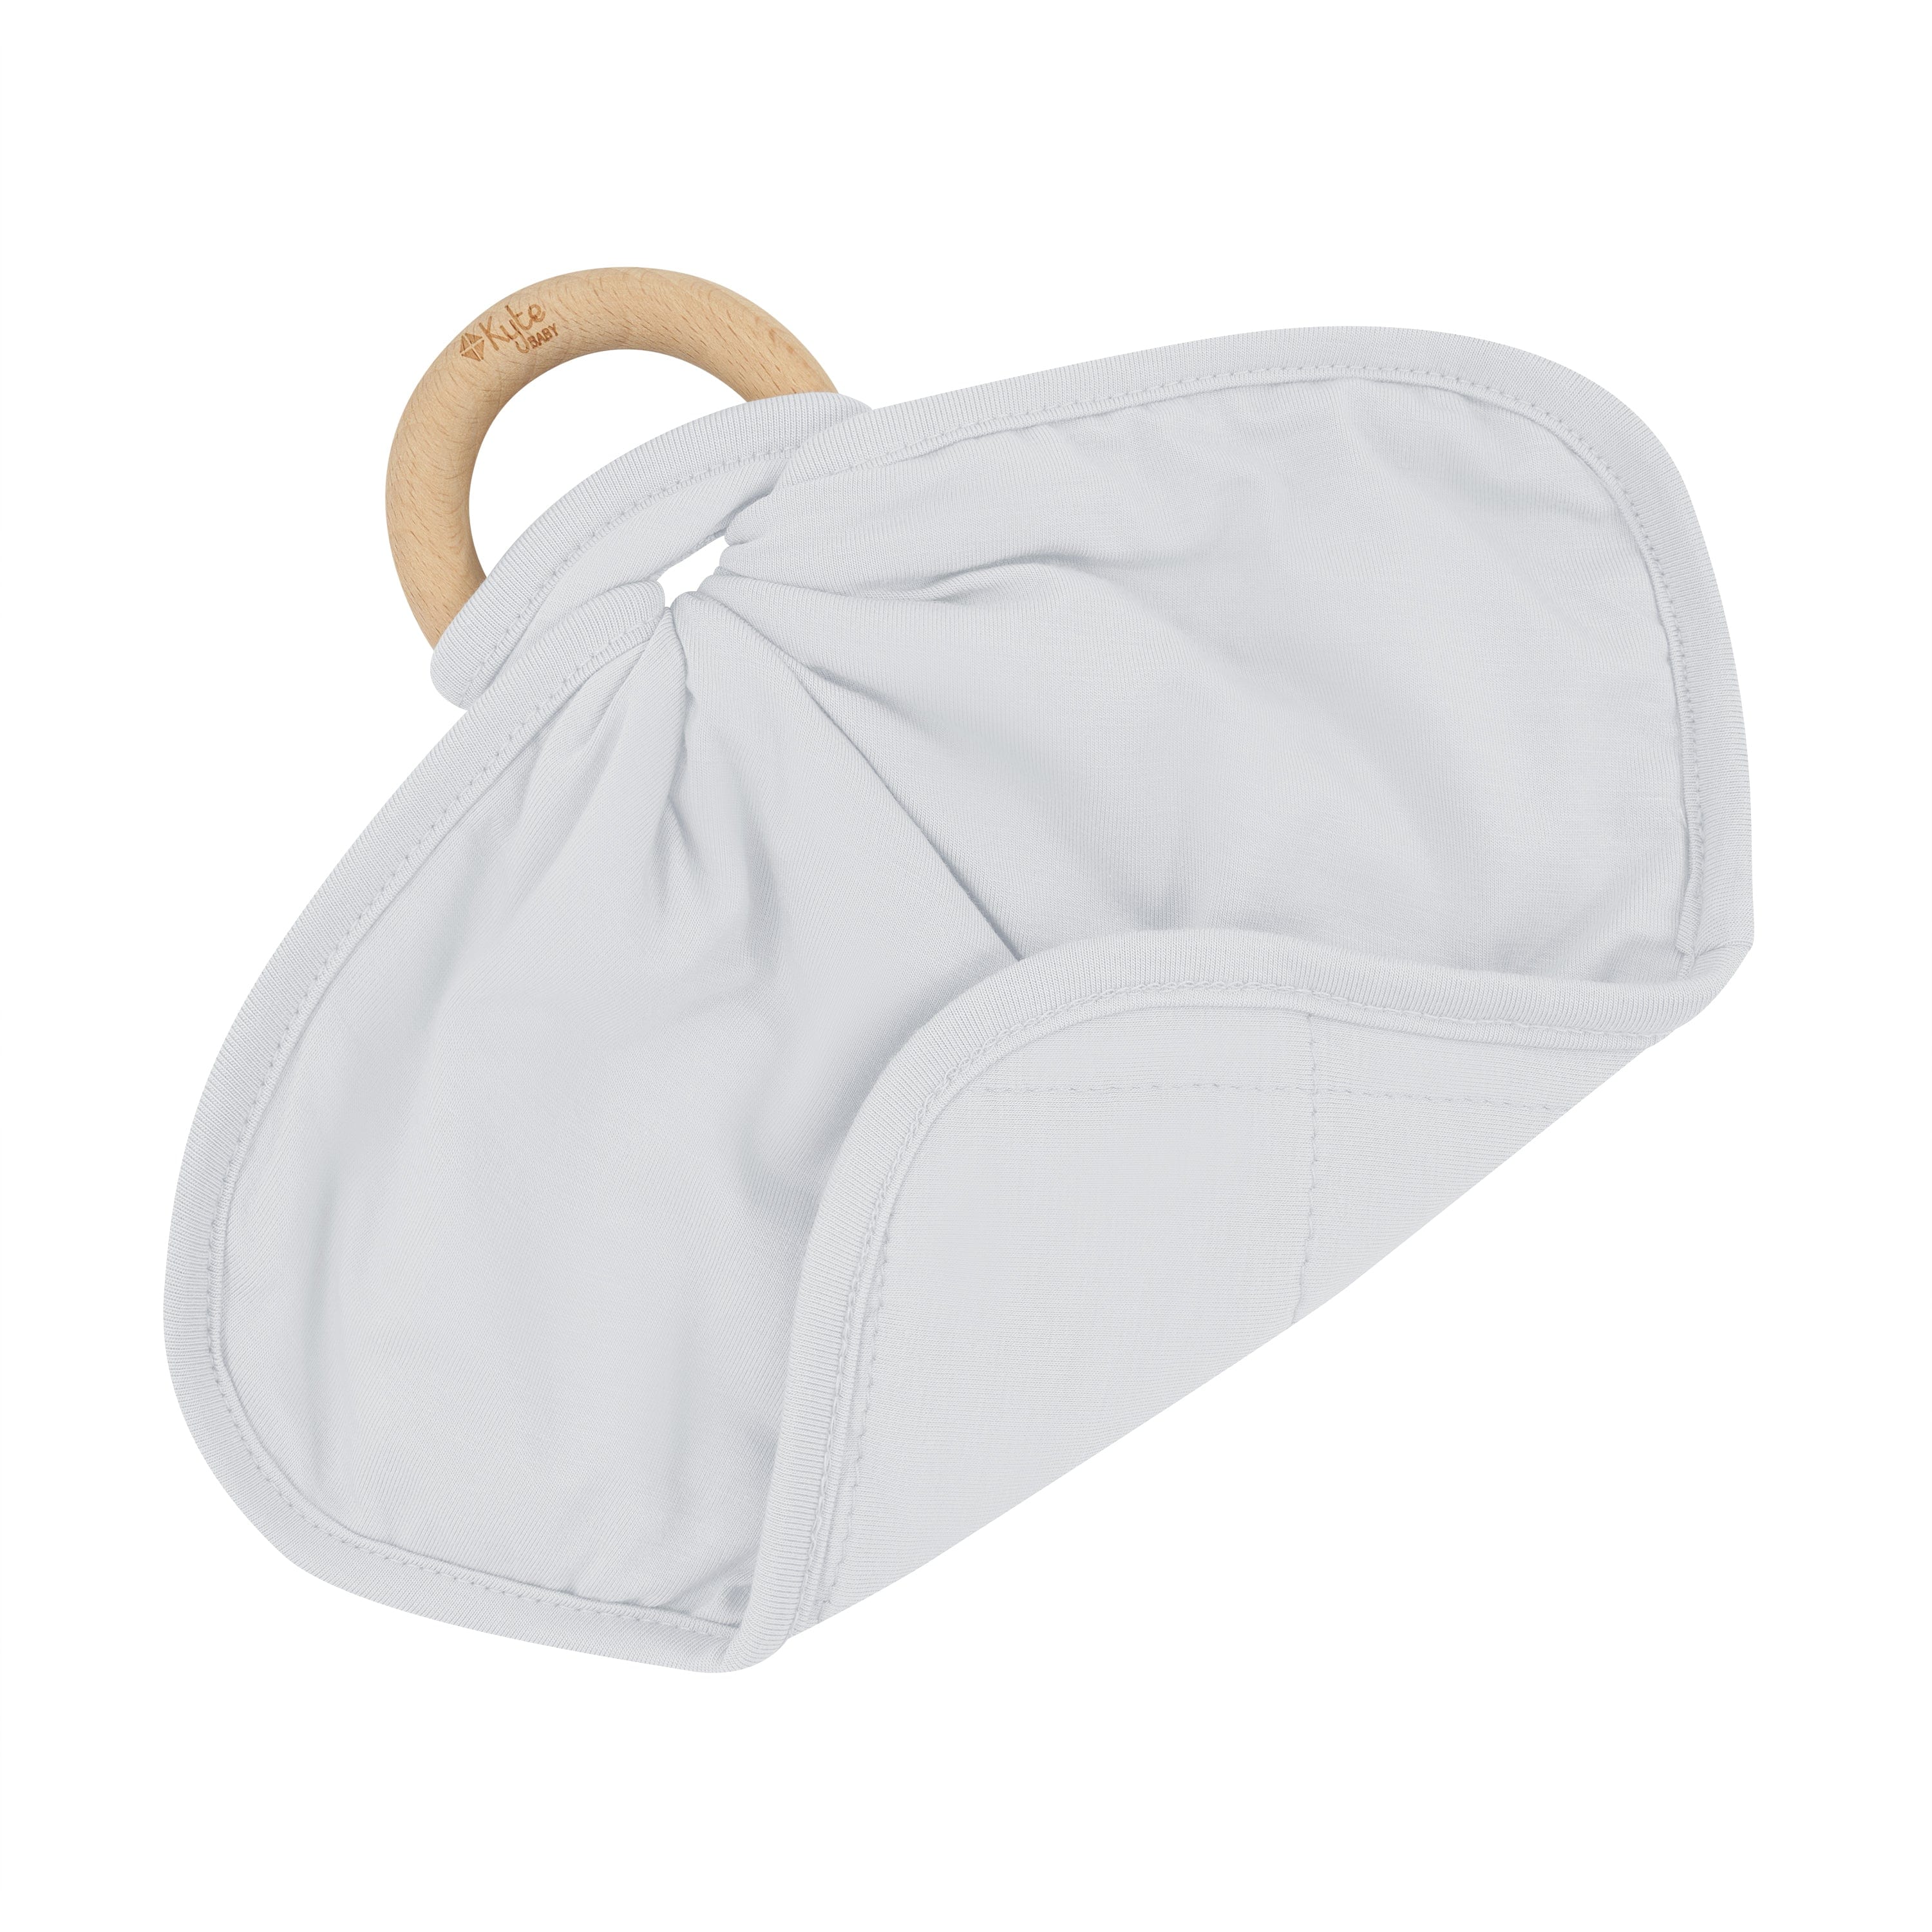 Kyte Baby Lovey Storm / Infant Lovey in Storm with Removable Wooden Teething Ring